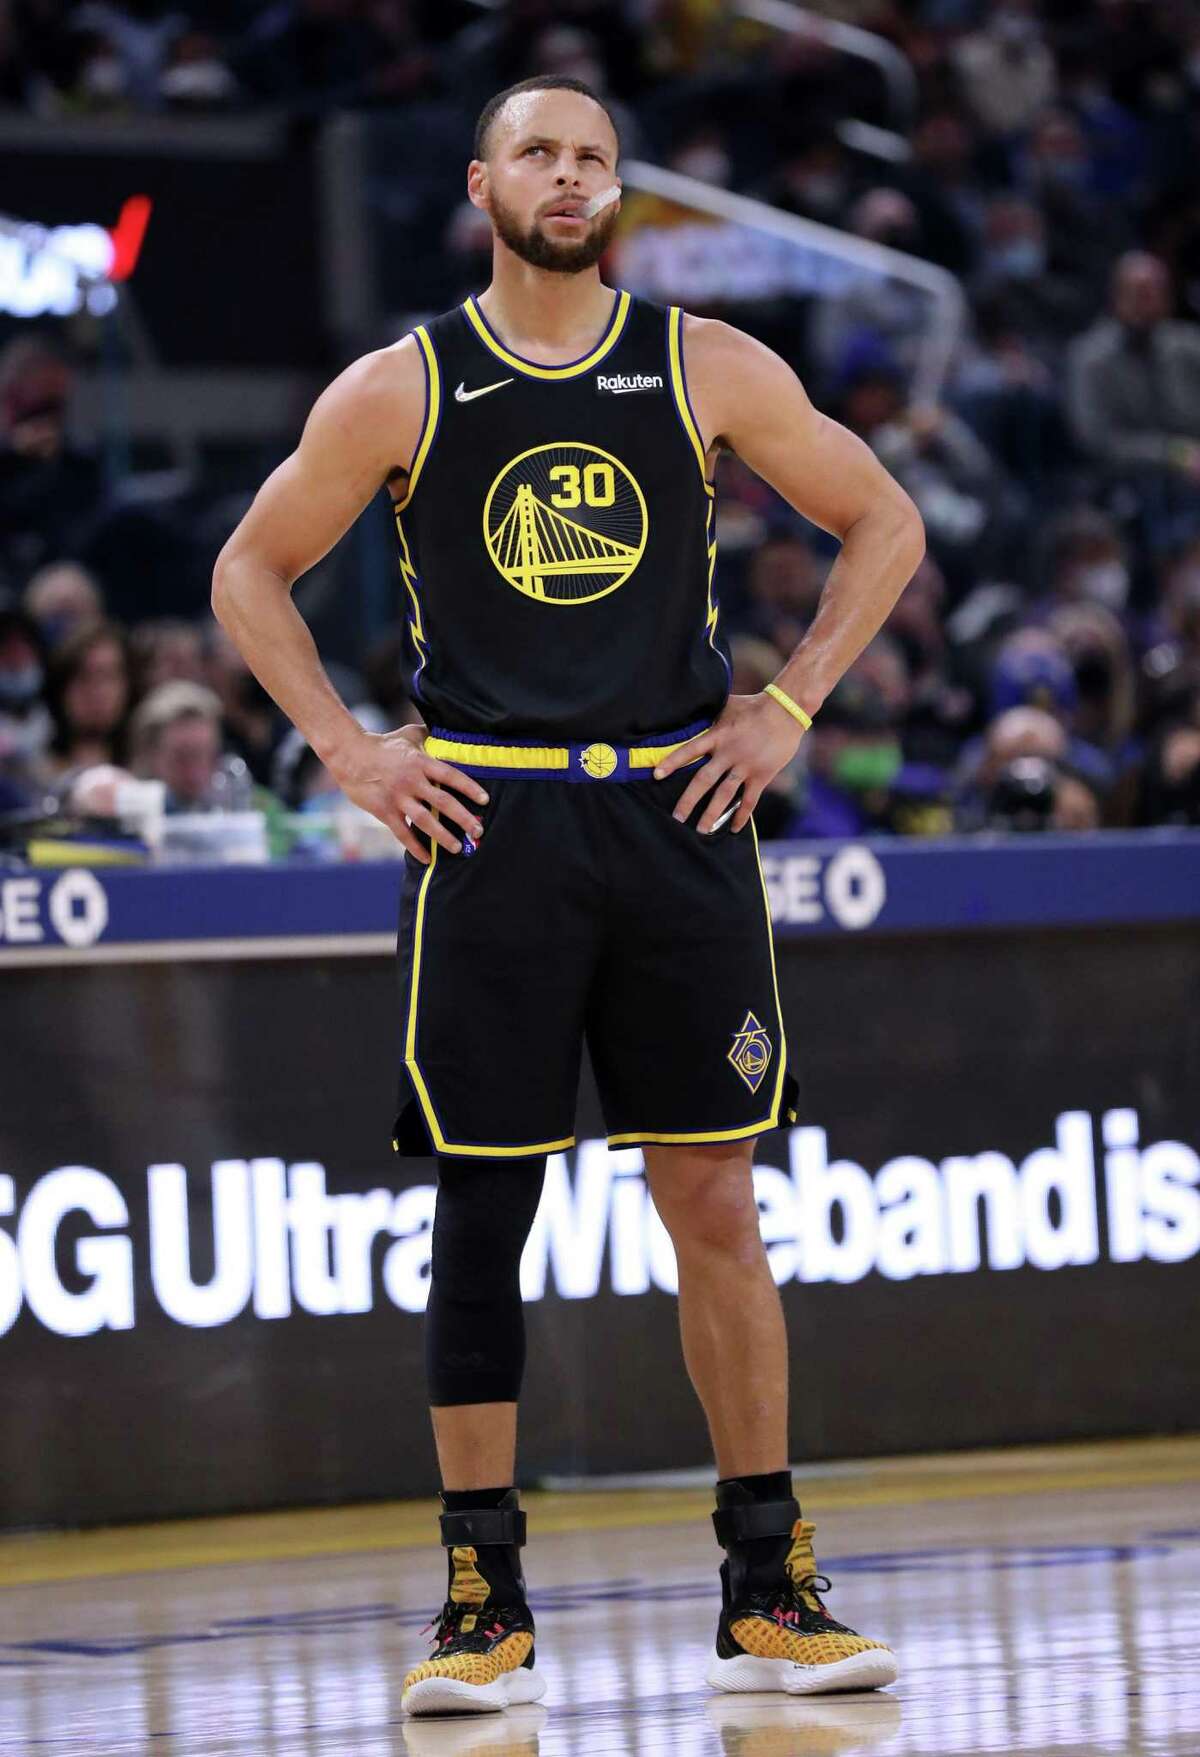 Golden State Warriors' Stephen Curry squints during 1st quarter against Utah Jazz during NBA game in San Francisco, Calif., on Sunday, January 23, 2022.